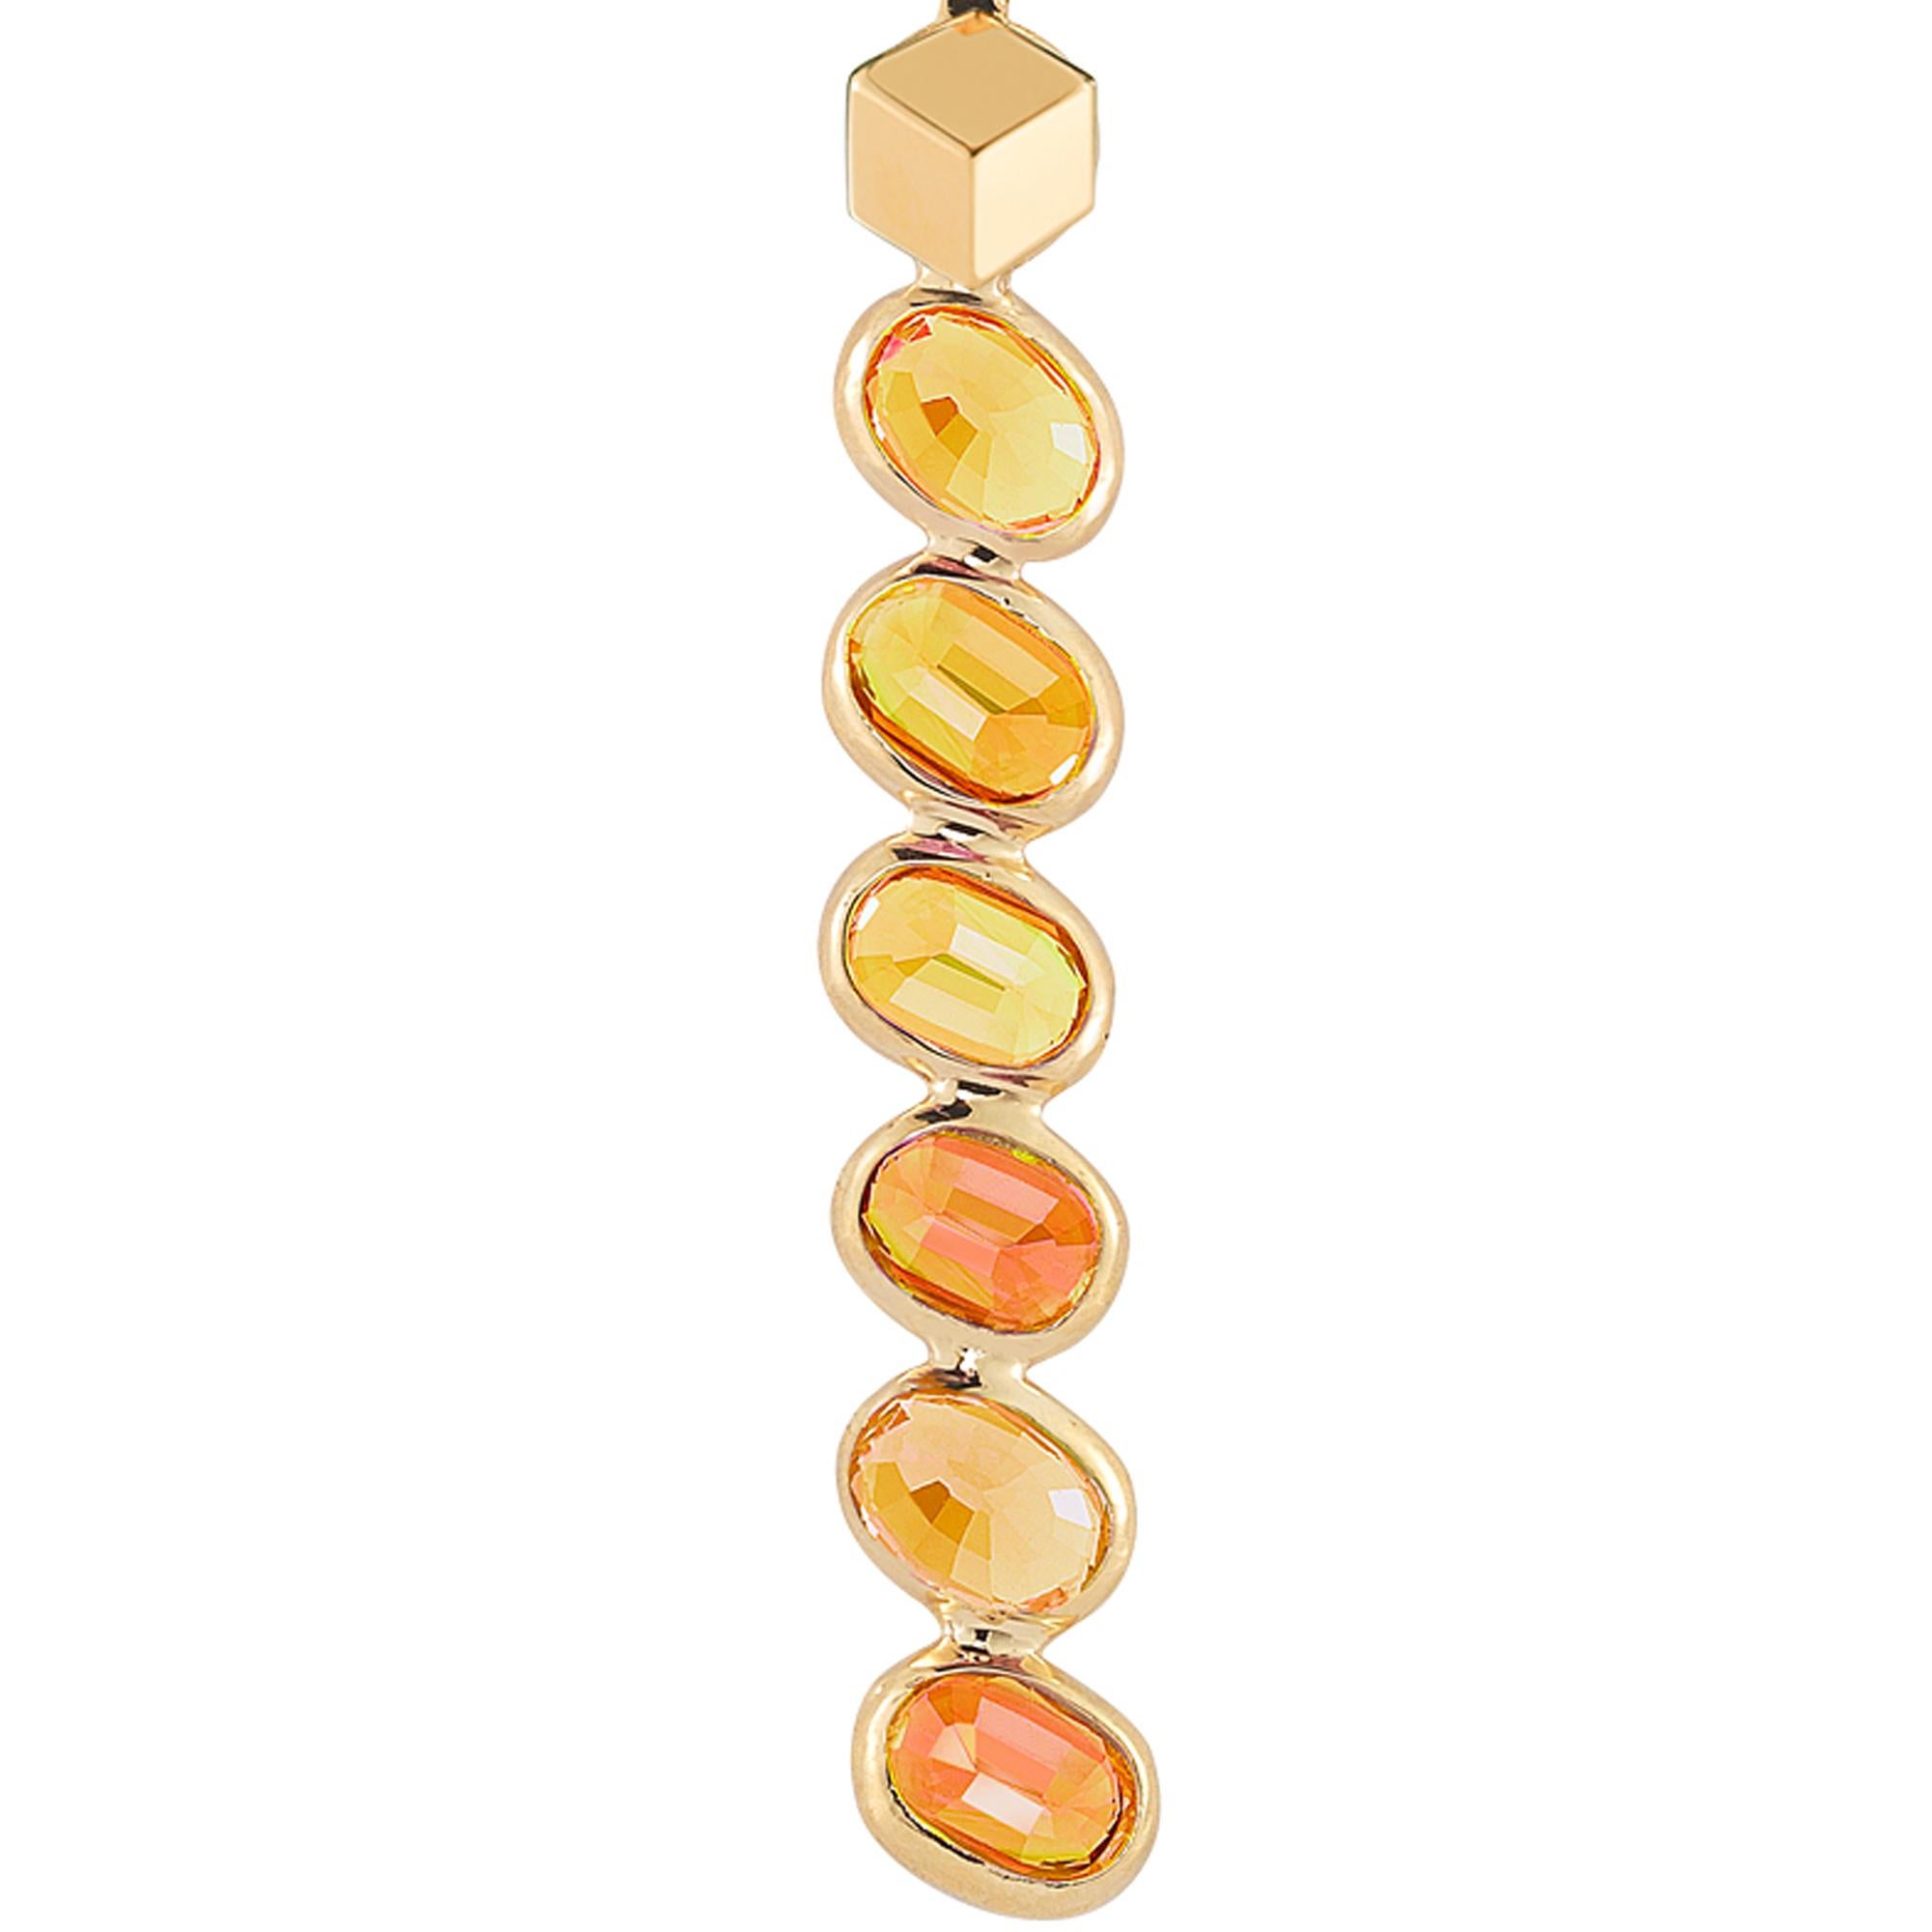 Oval Cut Paolo Costagli 18 Karat Yellow Gold Orange Sapphires Ombre Pendant Necklace For Sale